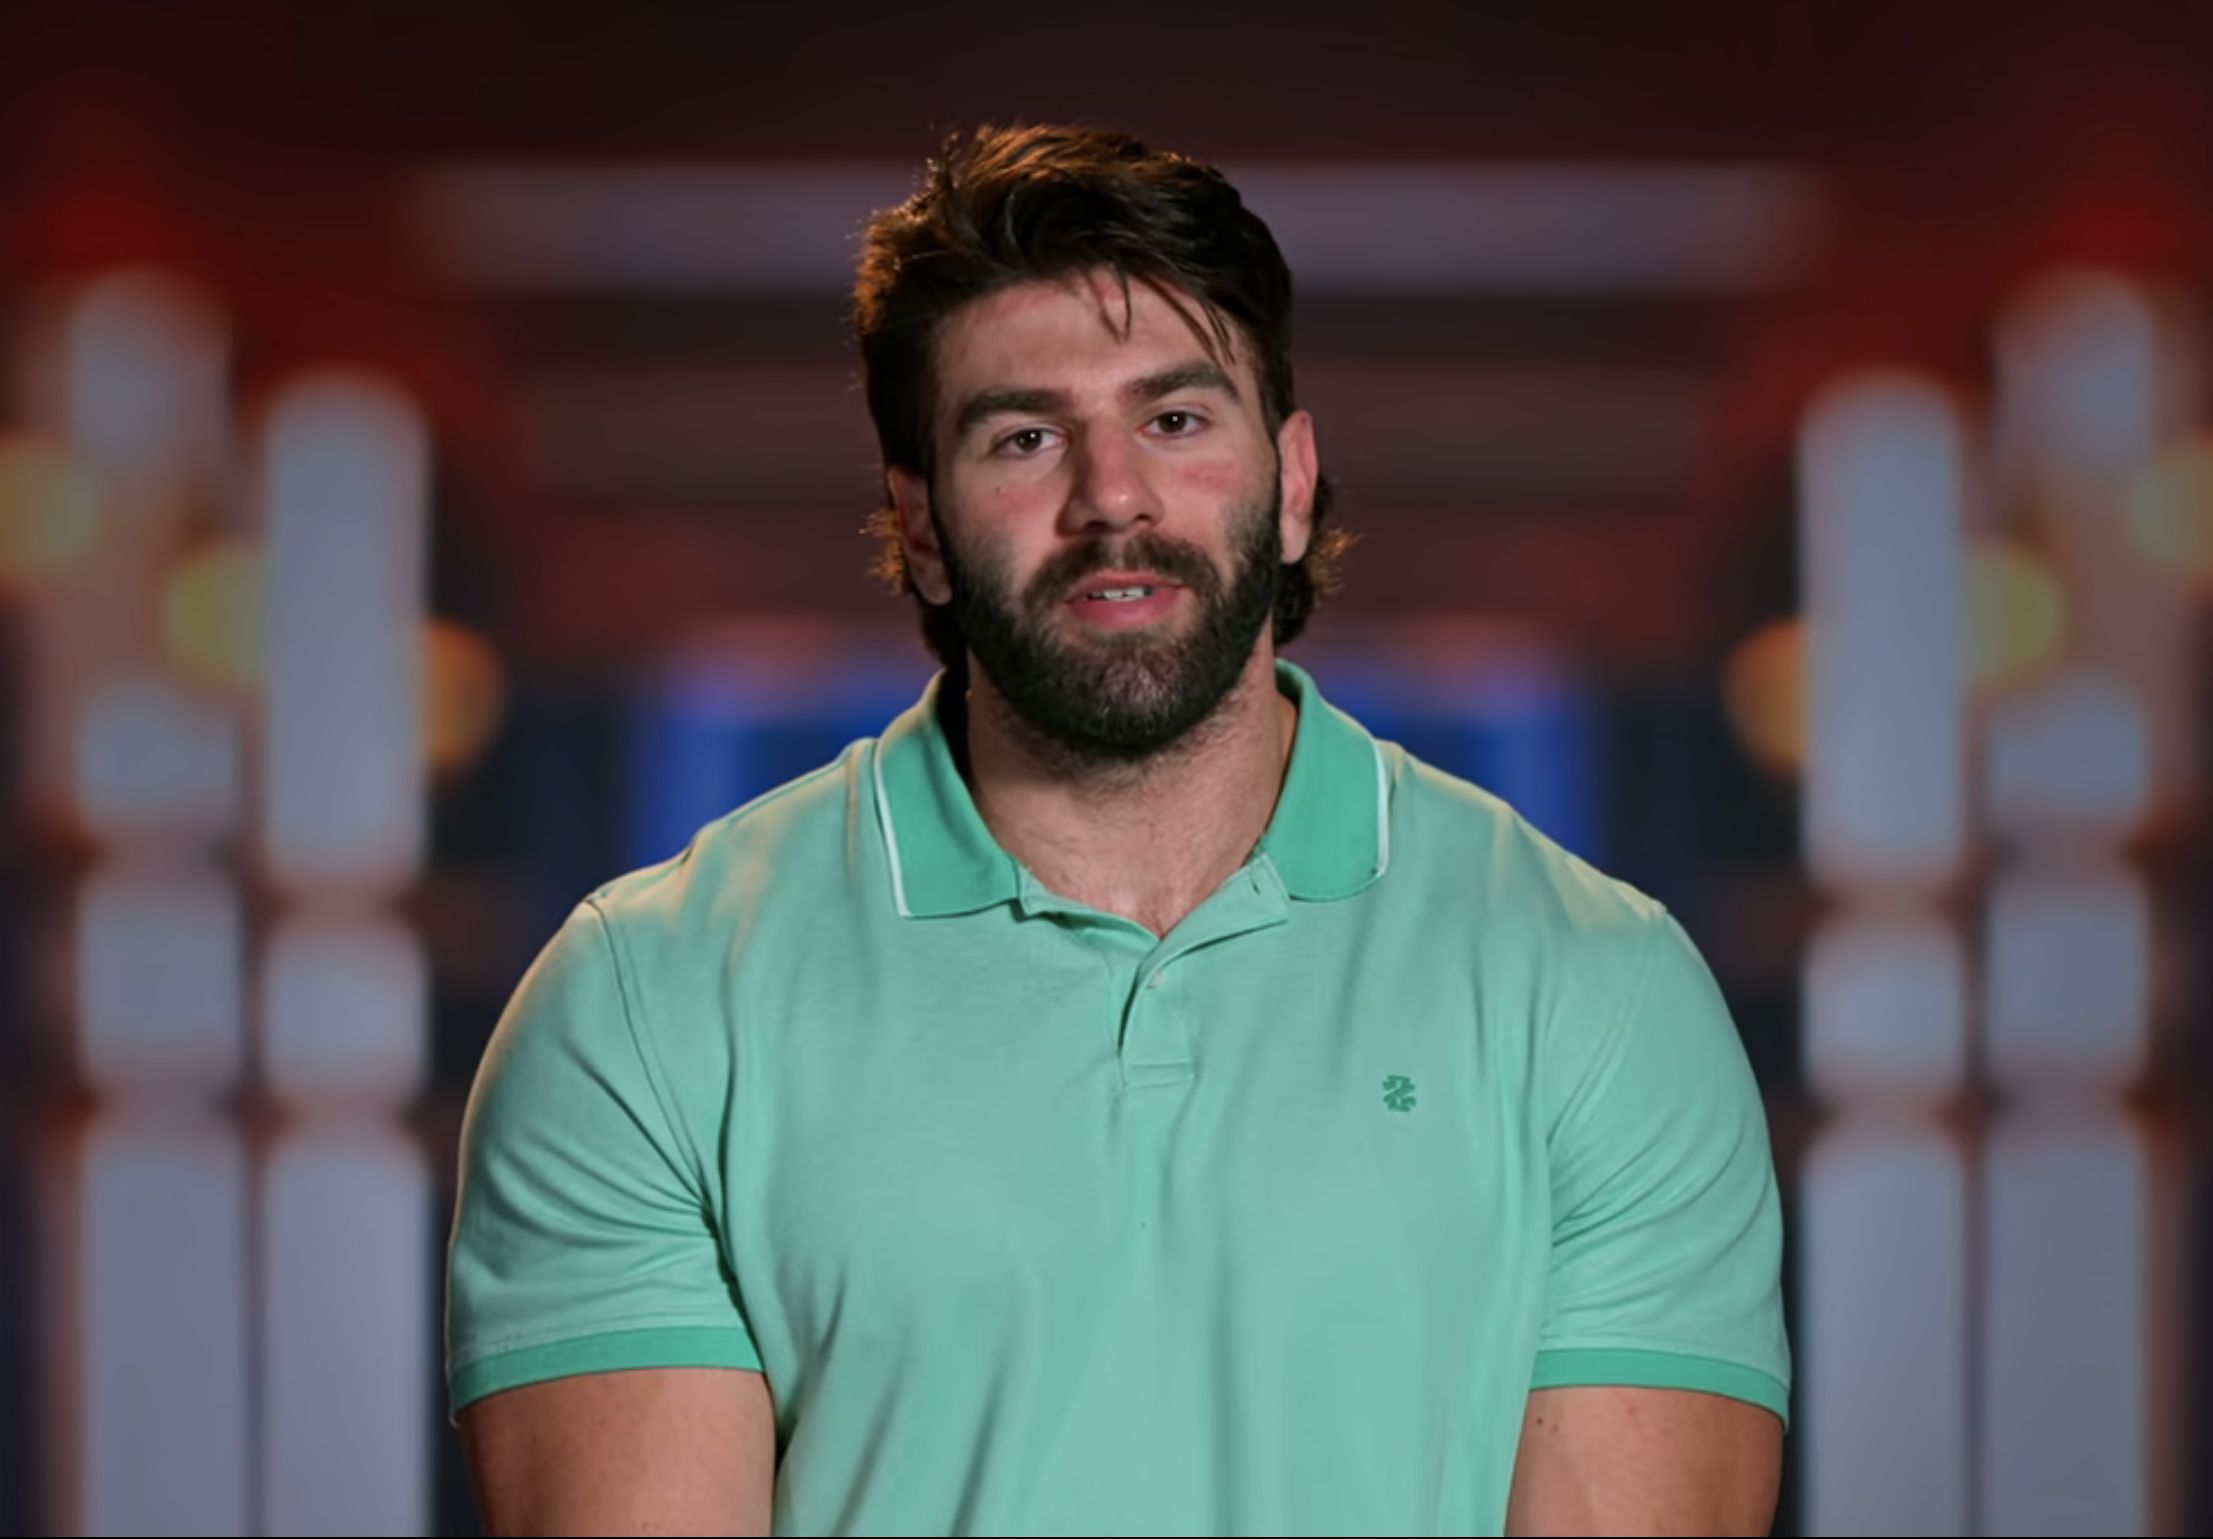 Trevor with beard in polo shirt against blurred background